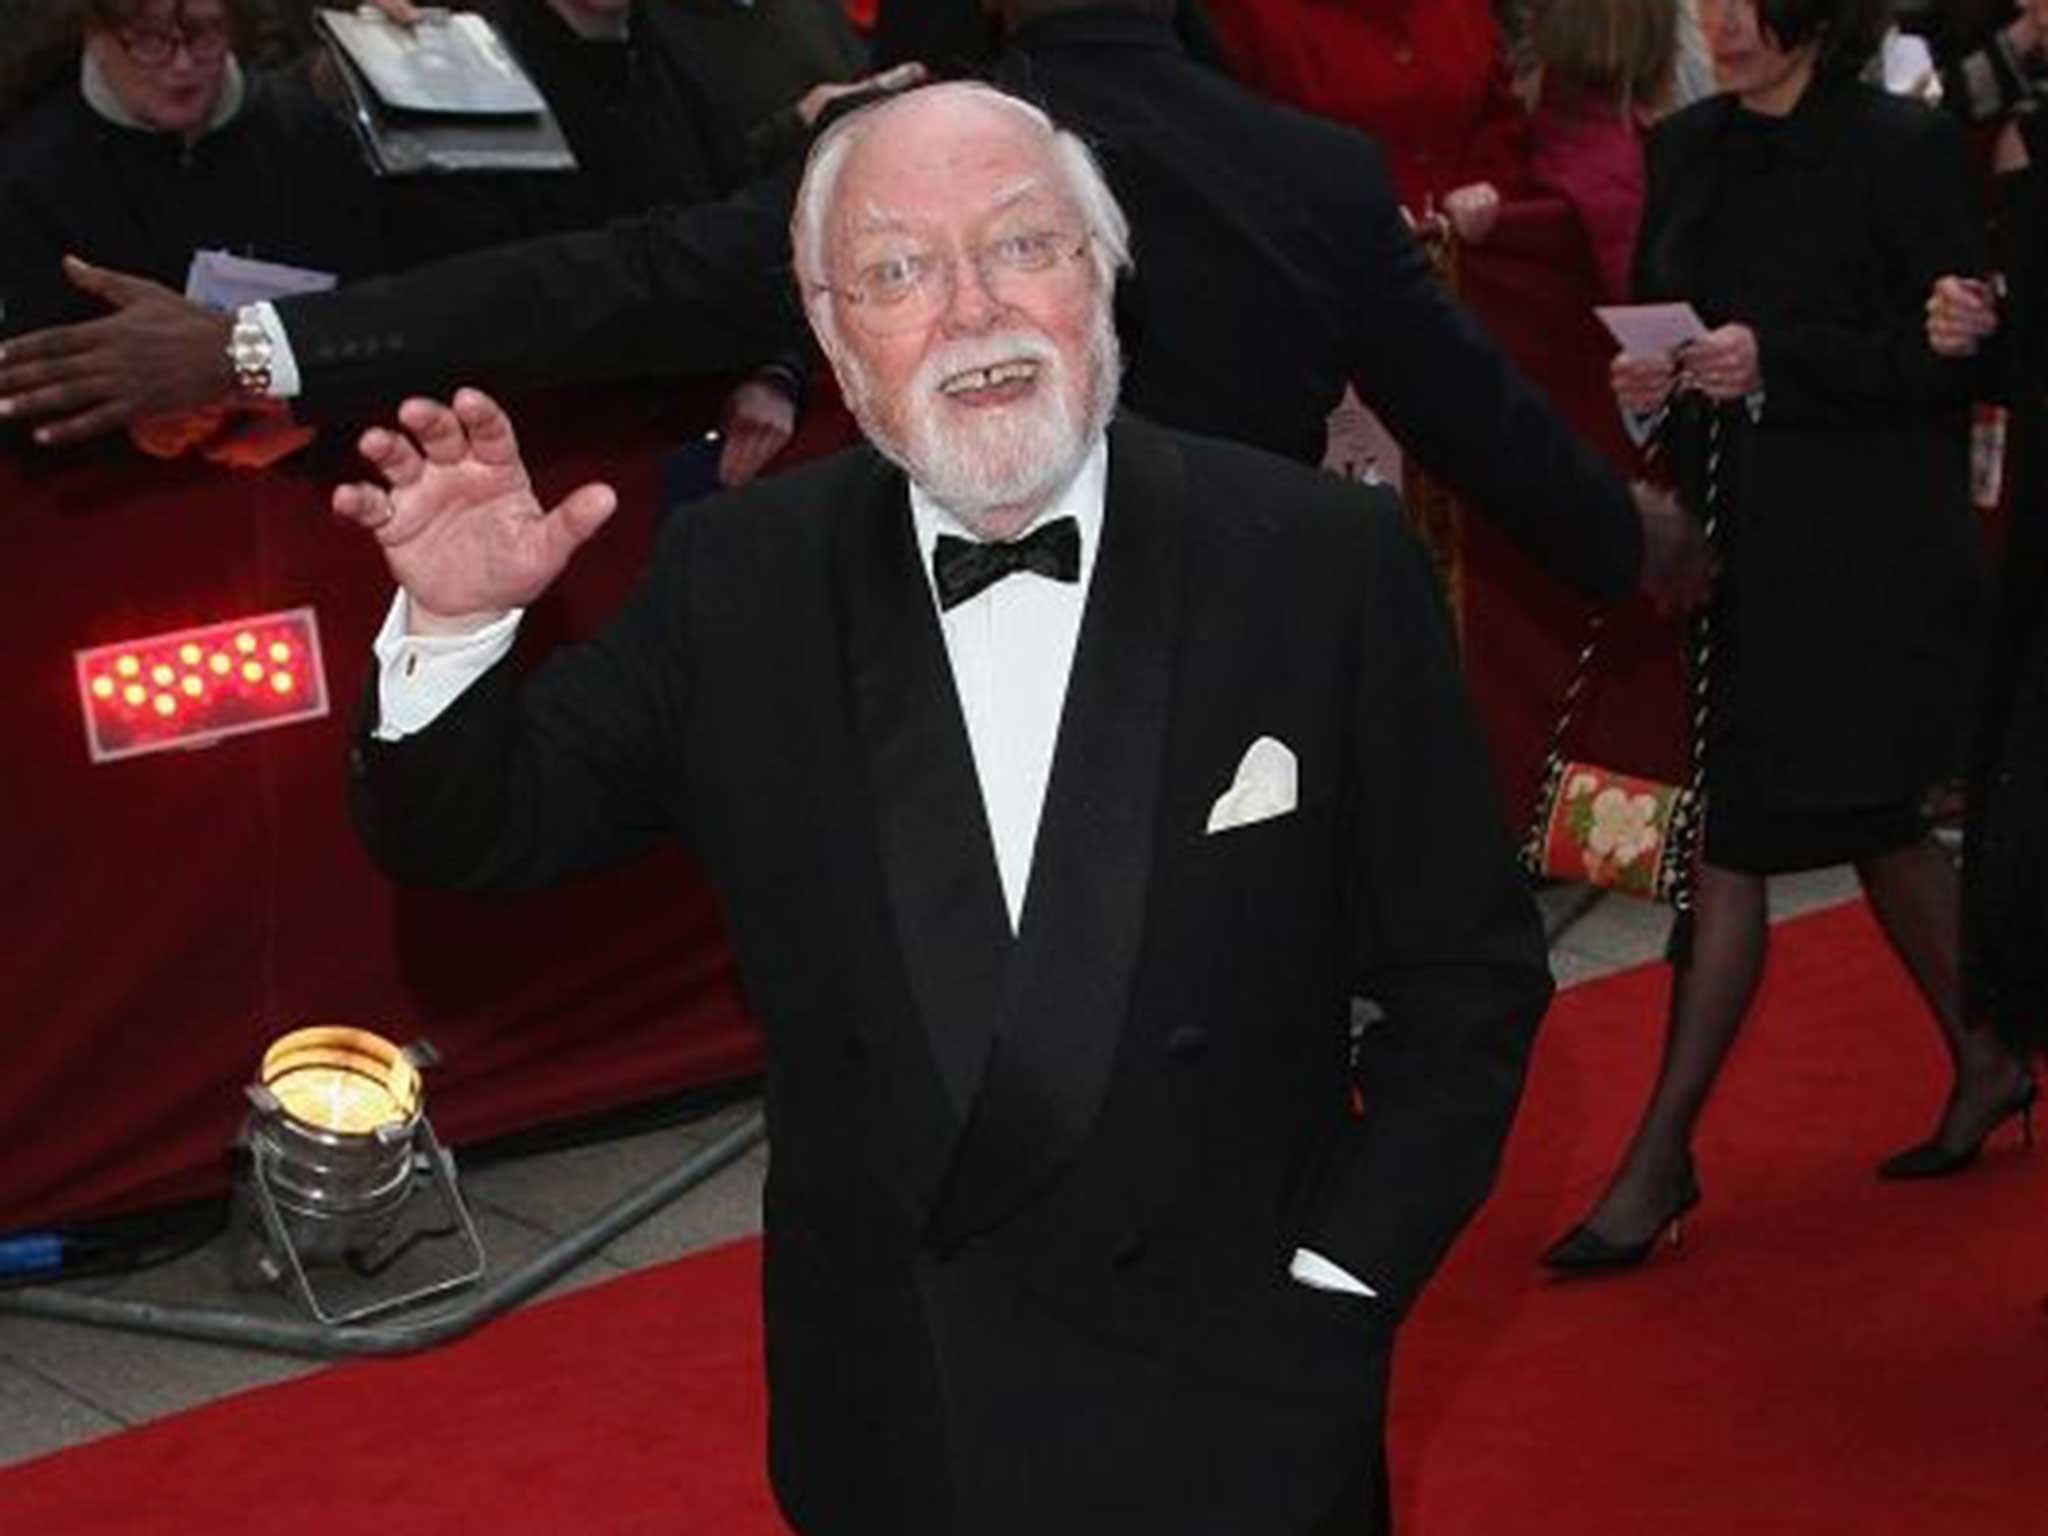 Richard Attenborough, who died on 25 August, attends a film premiere